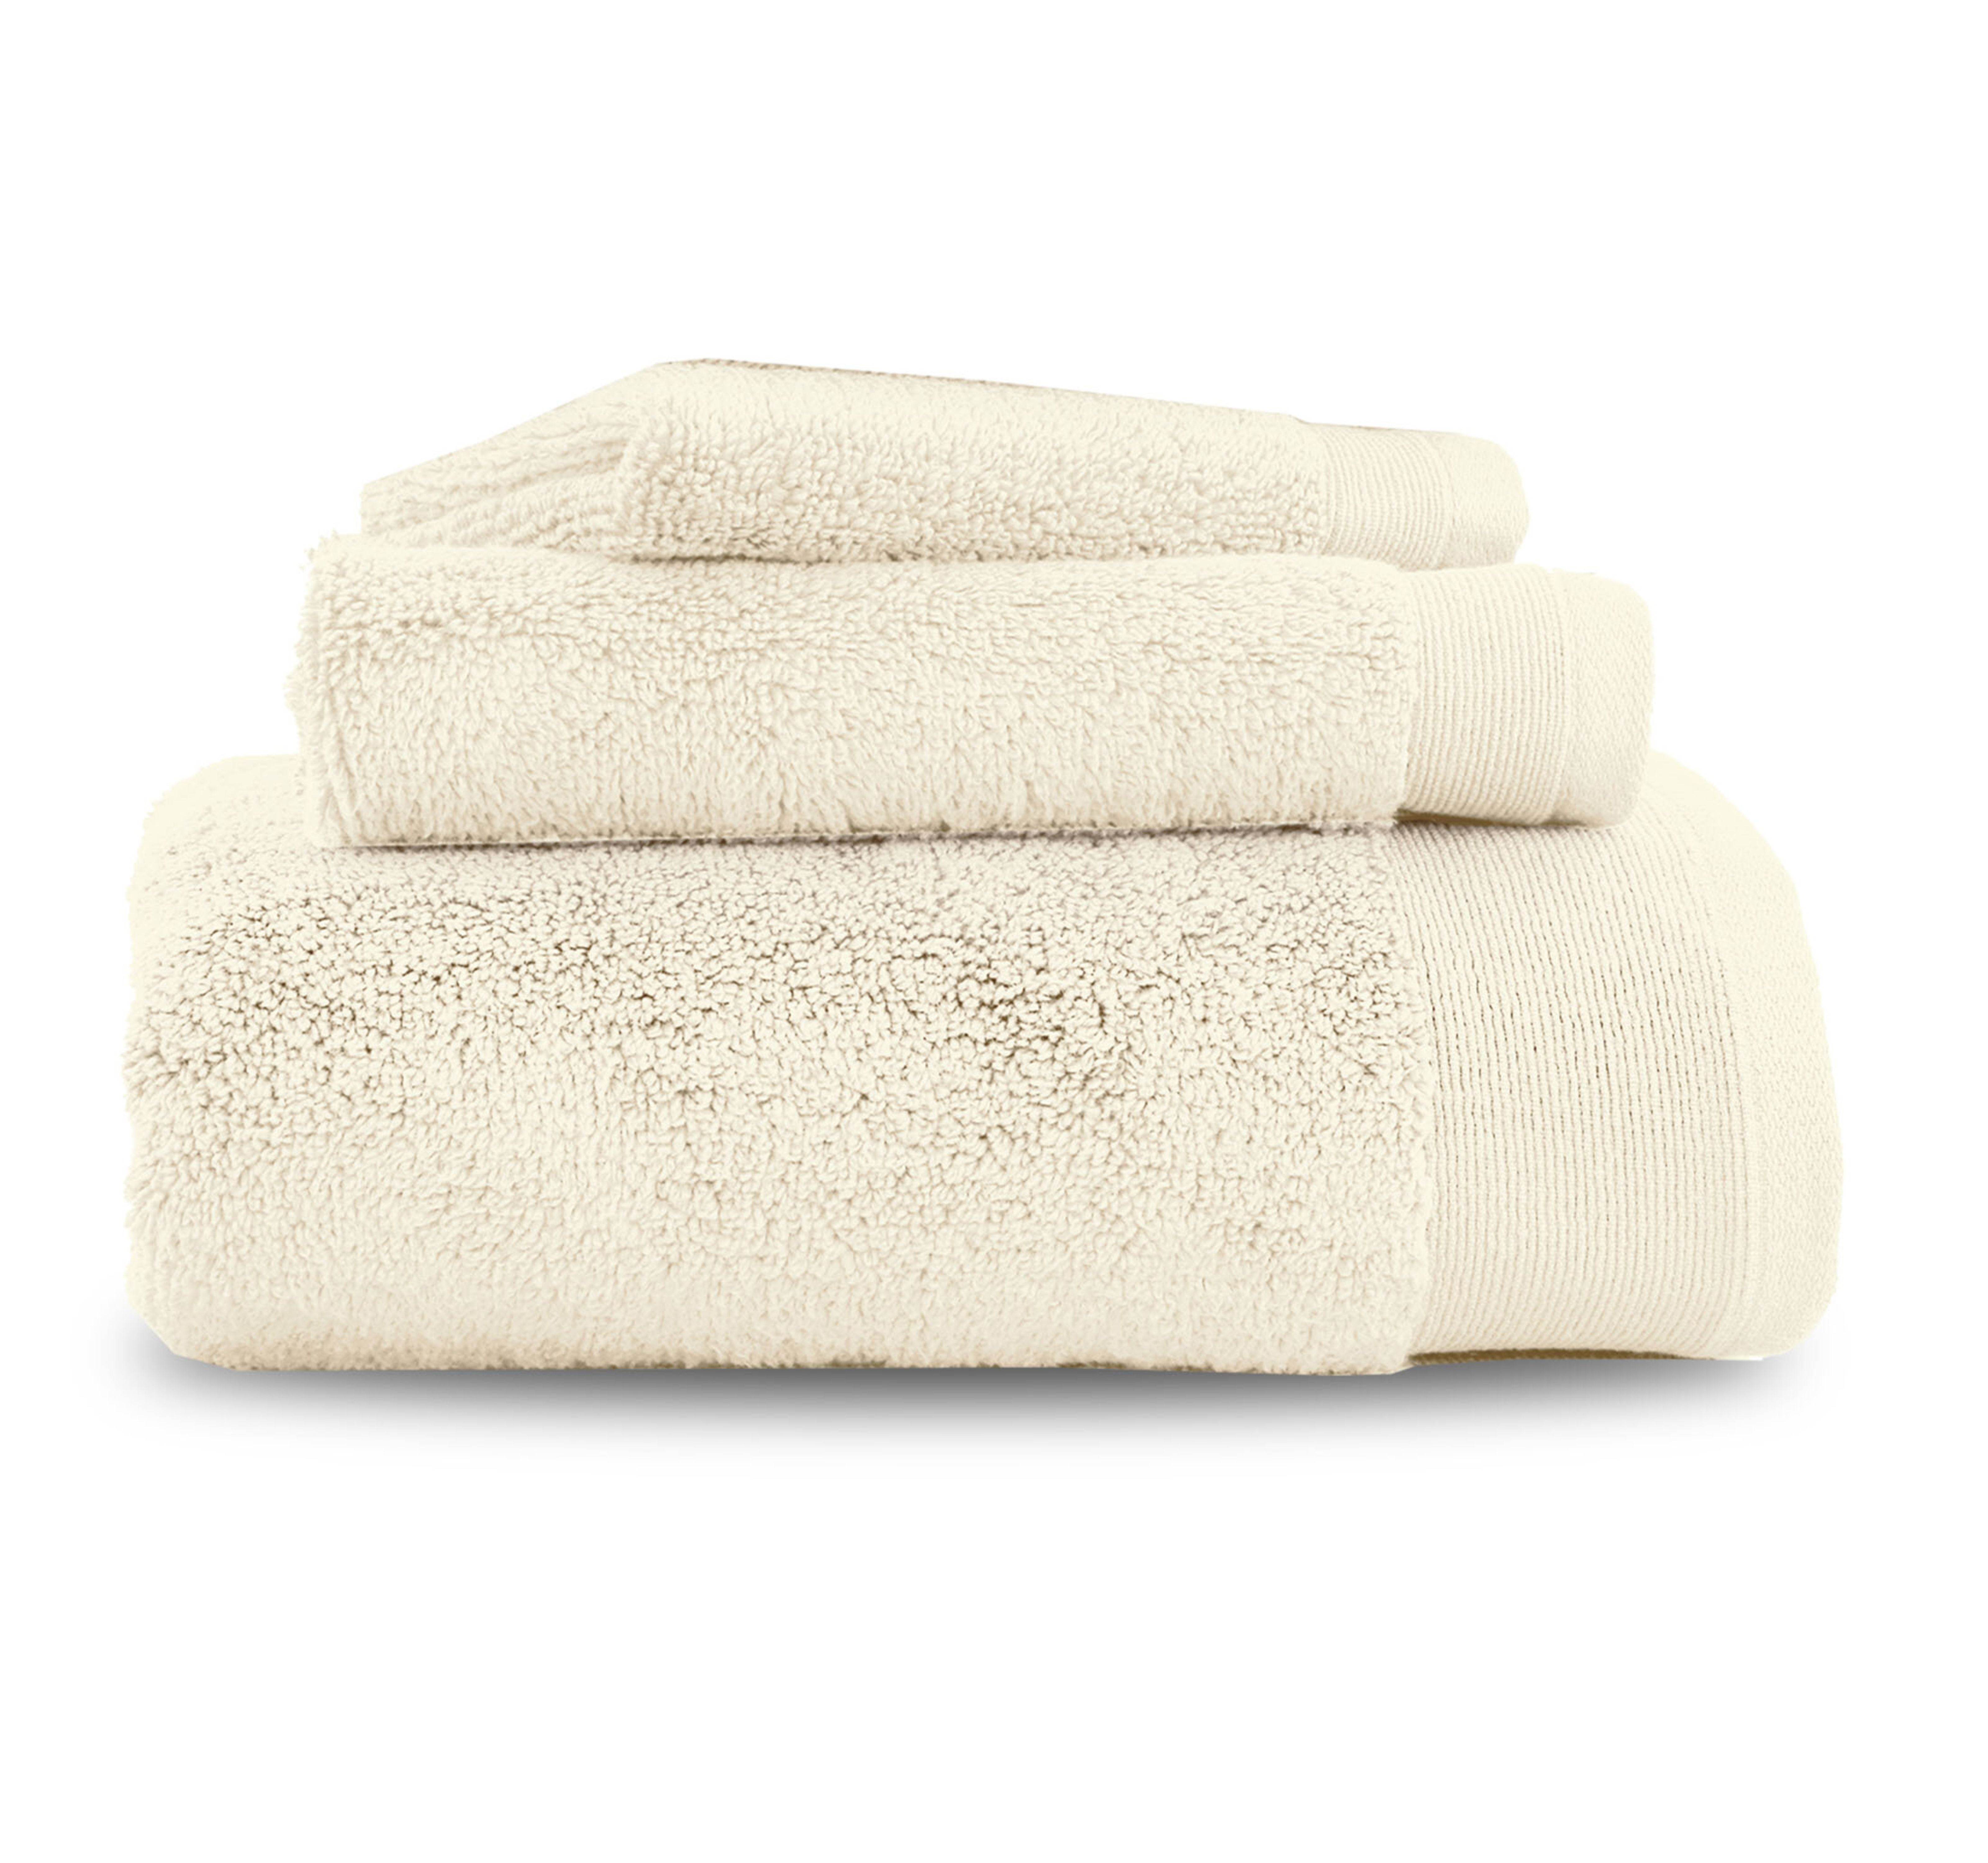 Luxury 100% Cotton Bath Towels Soft & Fluffy, Quick Dry, Highly Absorbent,  Hotel Quality Towel Set - 1 Bath Towel, 1 Hand Towel, 1 Wash Cloth (Ivory)  